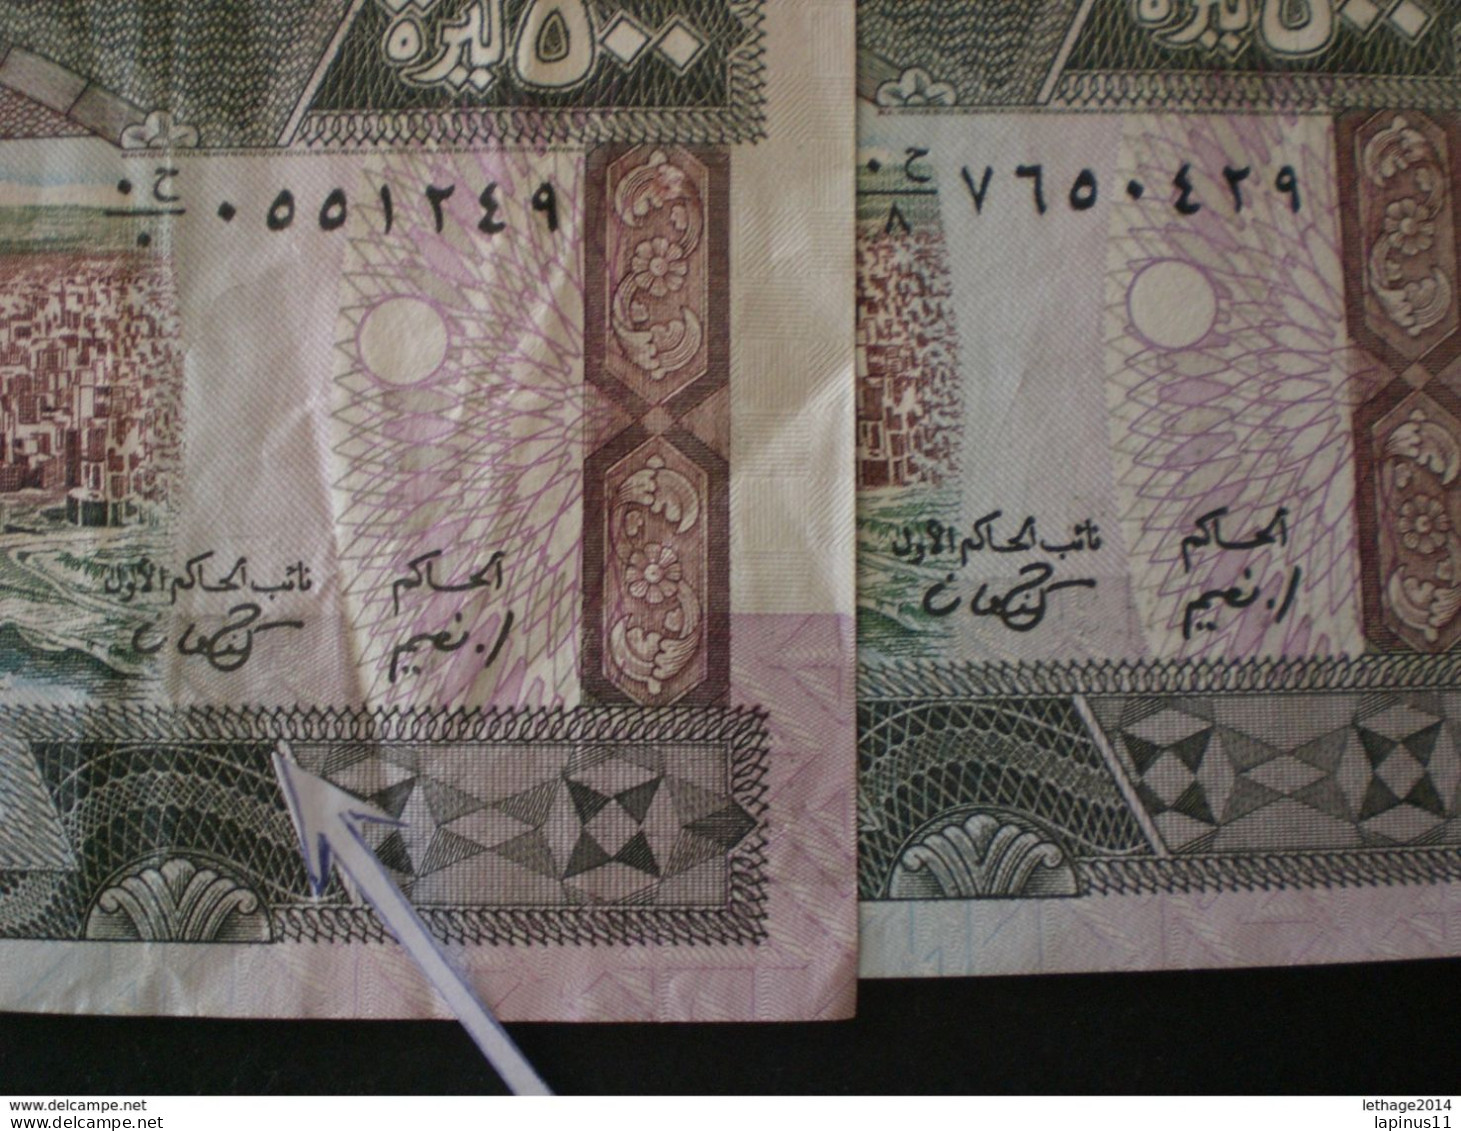 Liban Lebanon 500 Lira With ERROR In Color And Size Letter - Lebanon